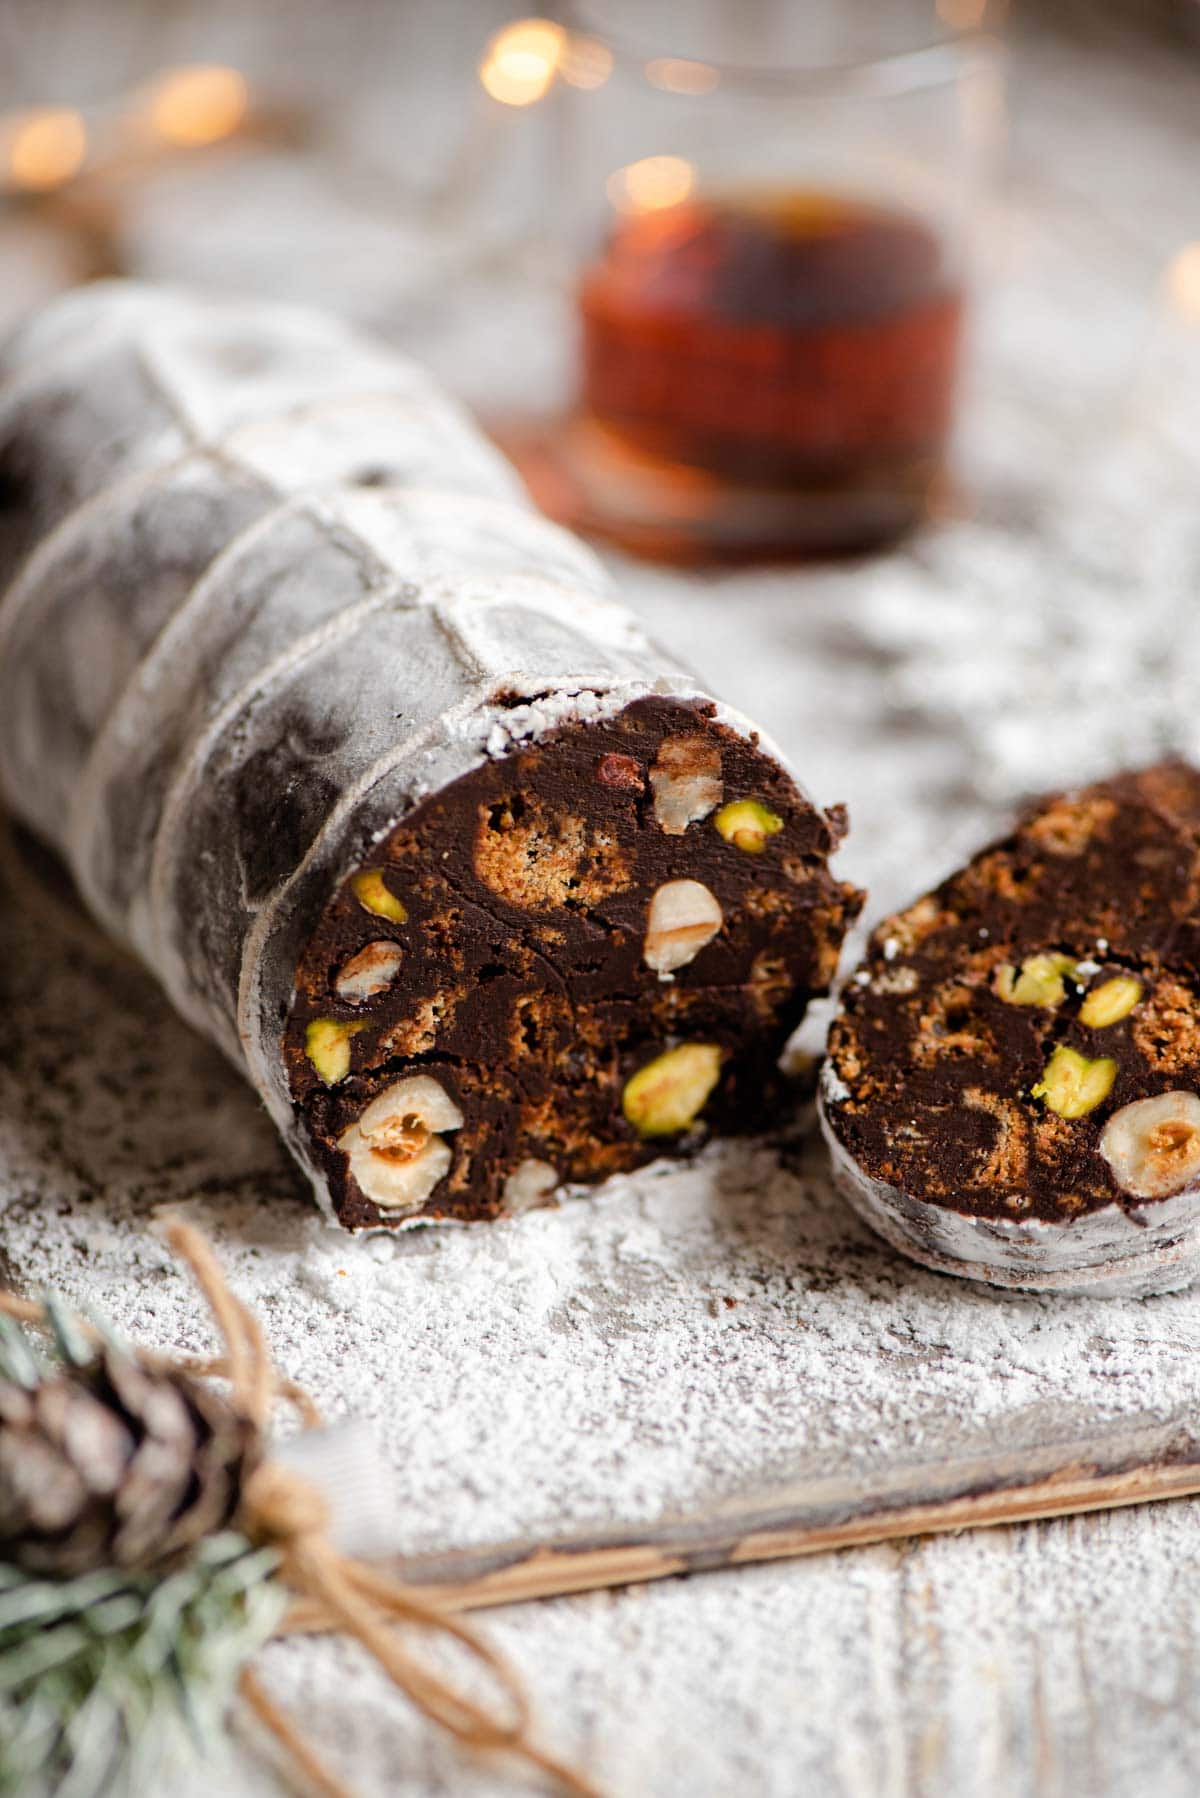 A close up of chocolate salami cut open showing the nuts and cookies inside